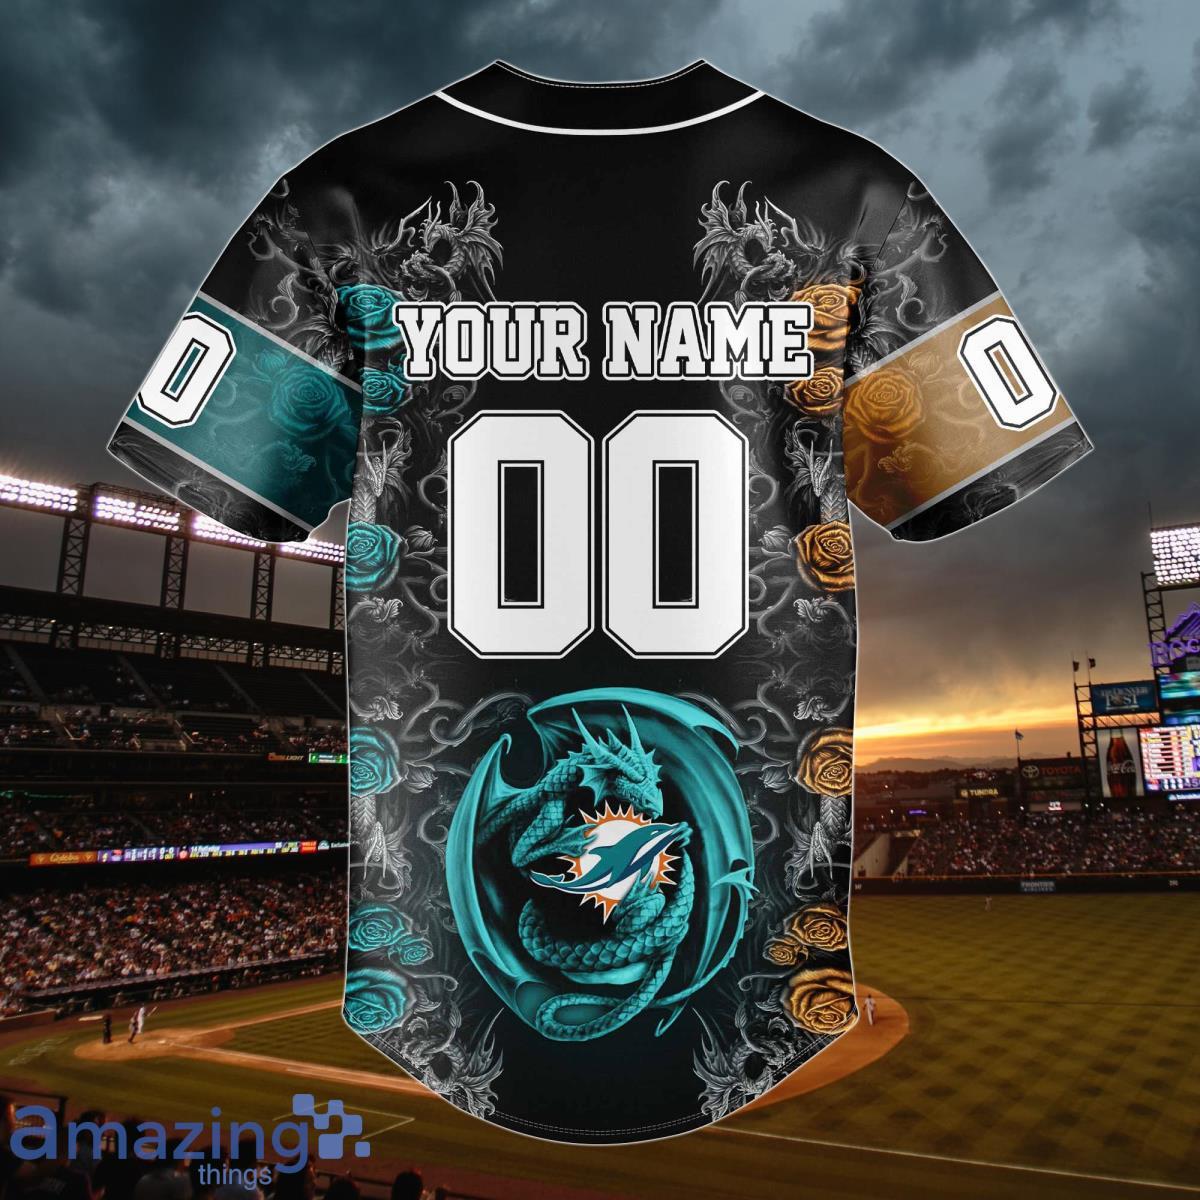 Top 5 Reasons Sublimated Jerseys are Great for Gameday!